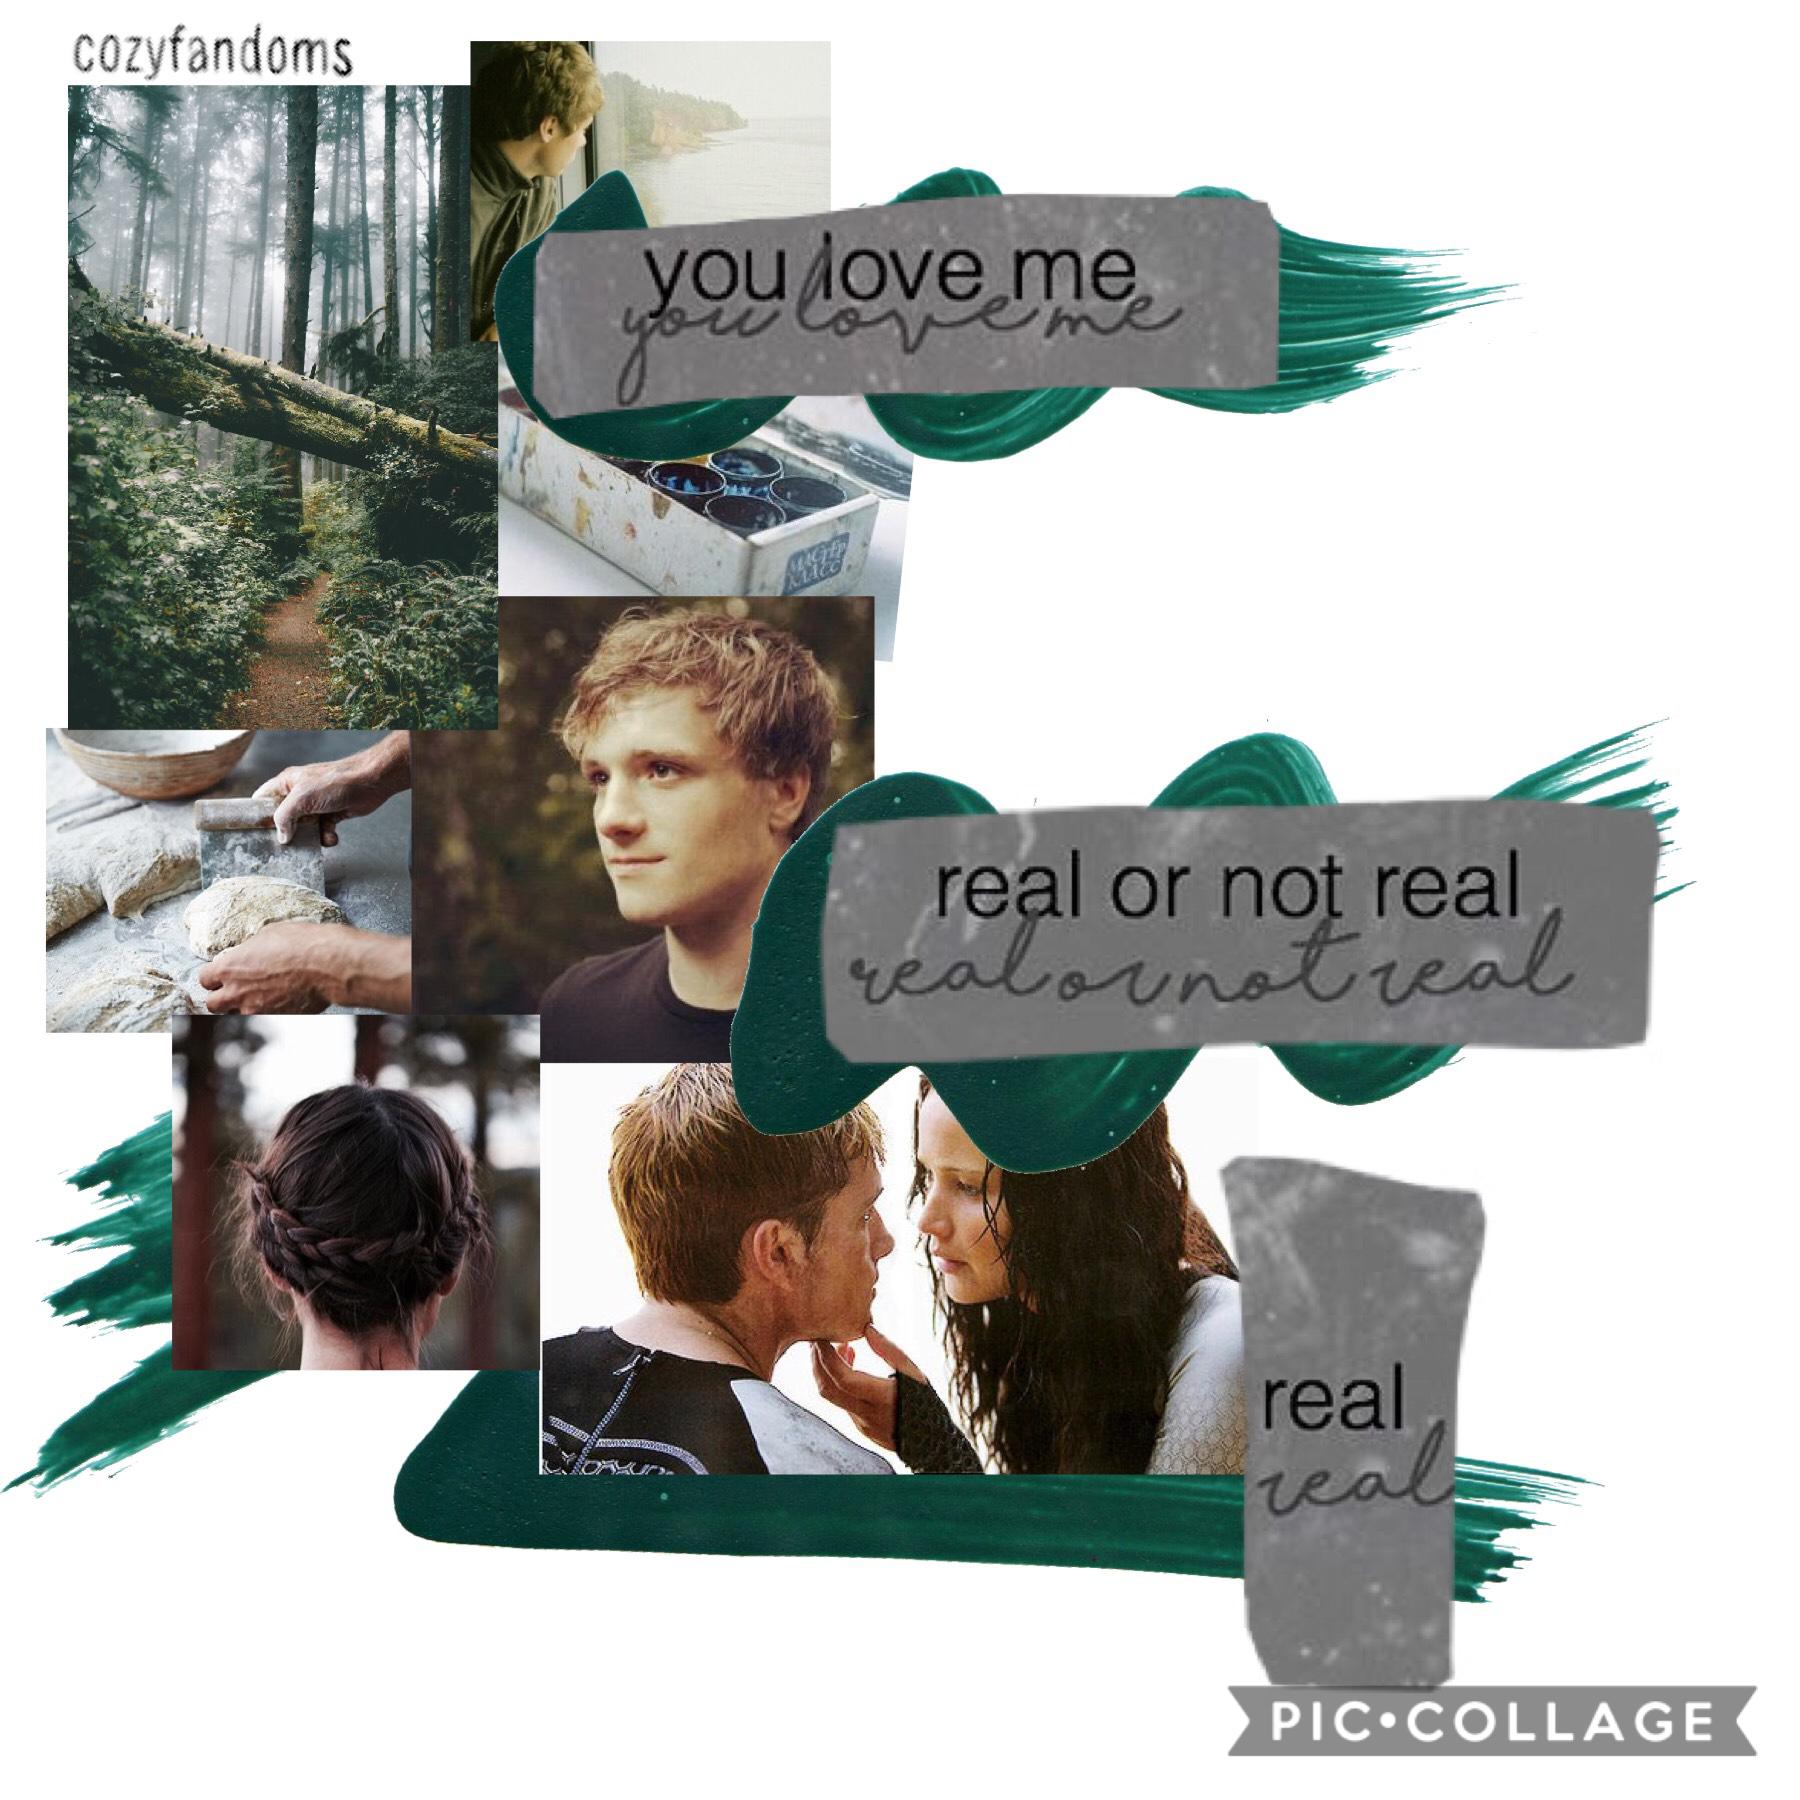 9/18/18
Sooooo, haven’t posted lately. School isn’t really busy so I have no excuse. Yep...this was an old entry to GrangerPotterMalfoys games. Honestly I’m in a really great emotional place rn...so happy...:)